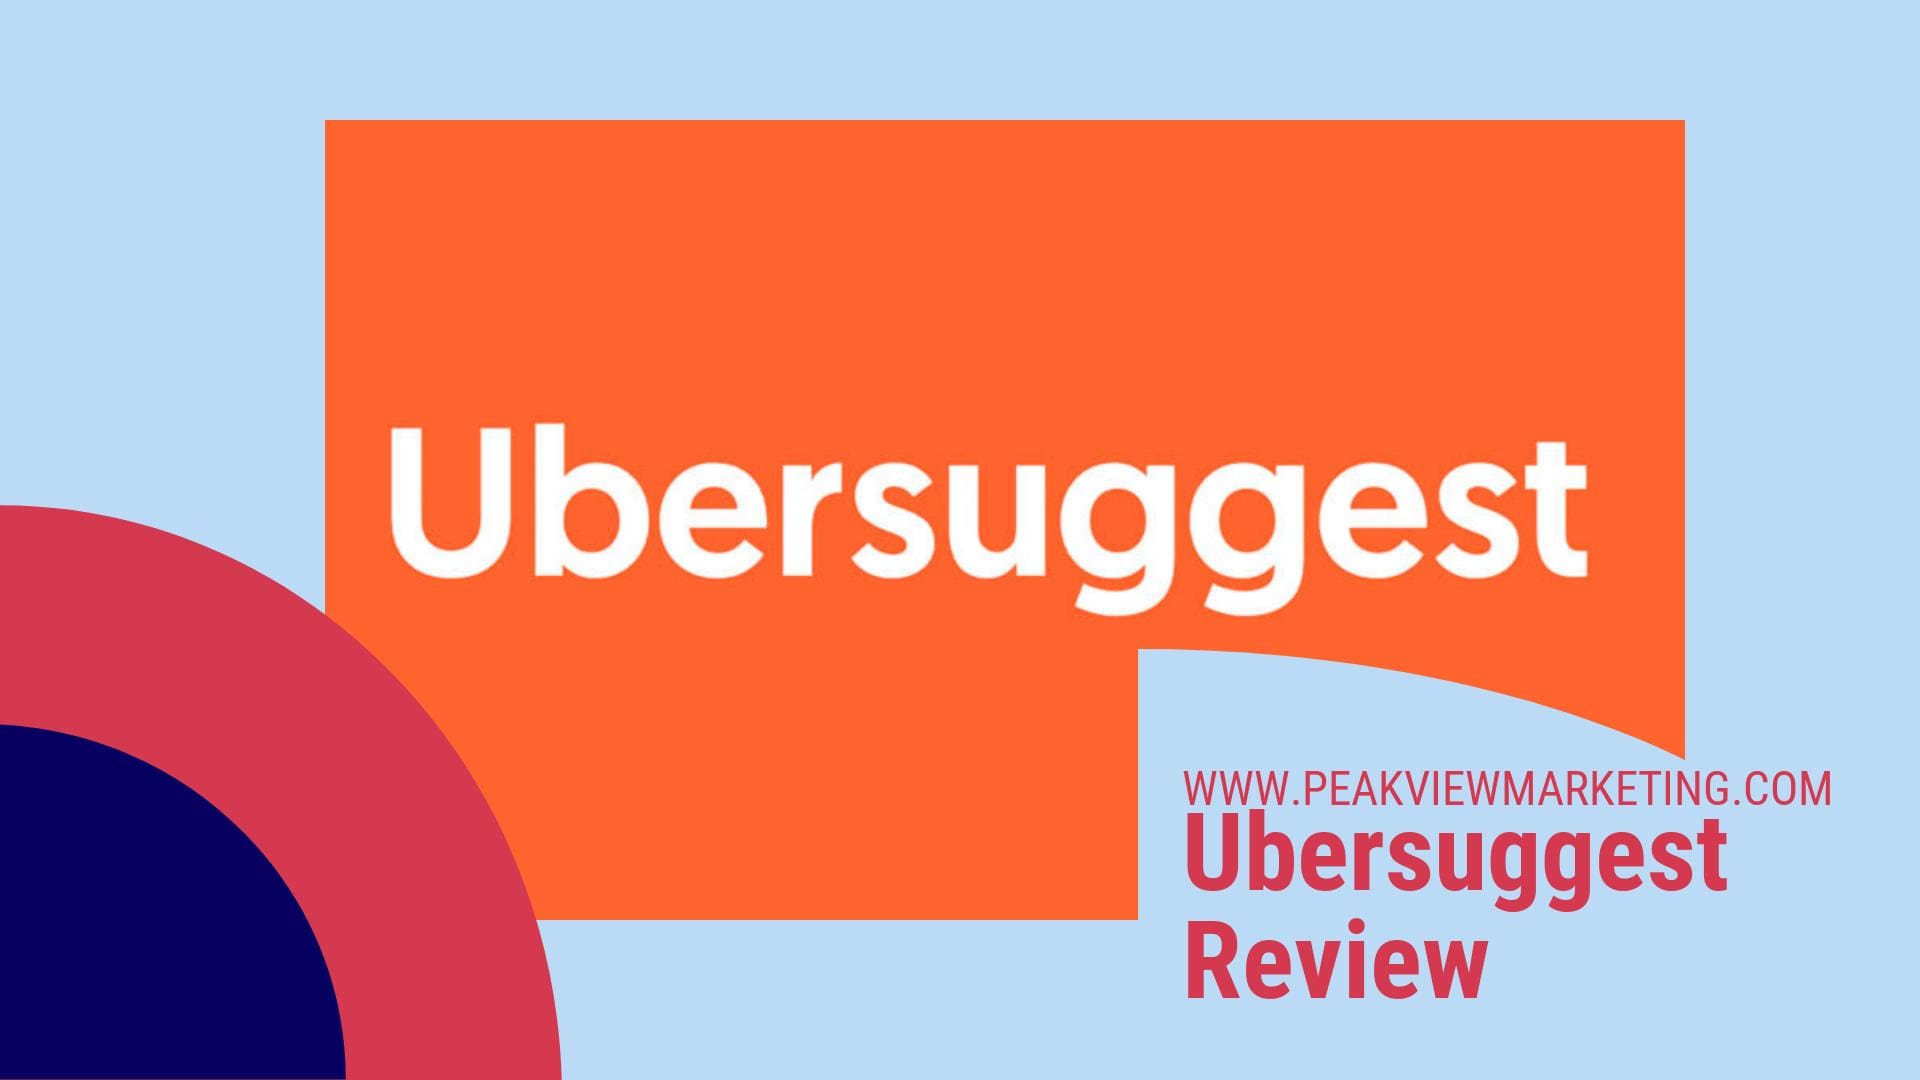 Ubersuggest Review Image